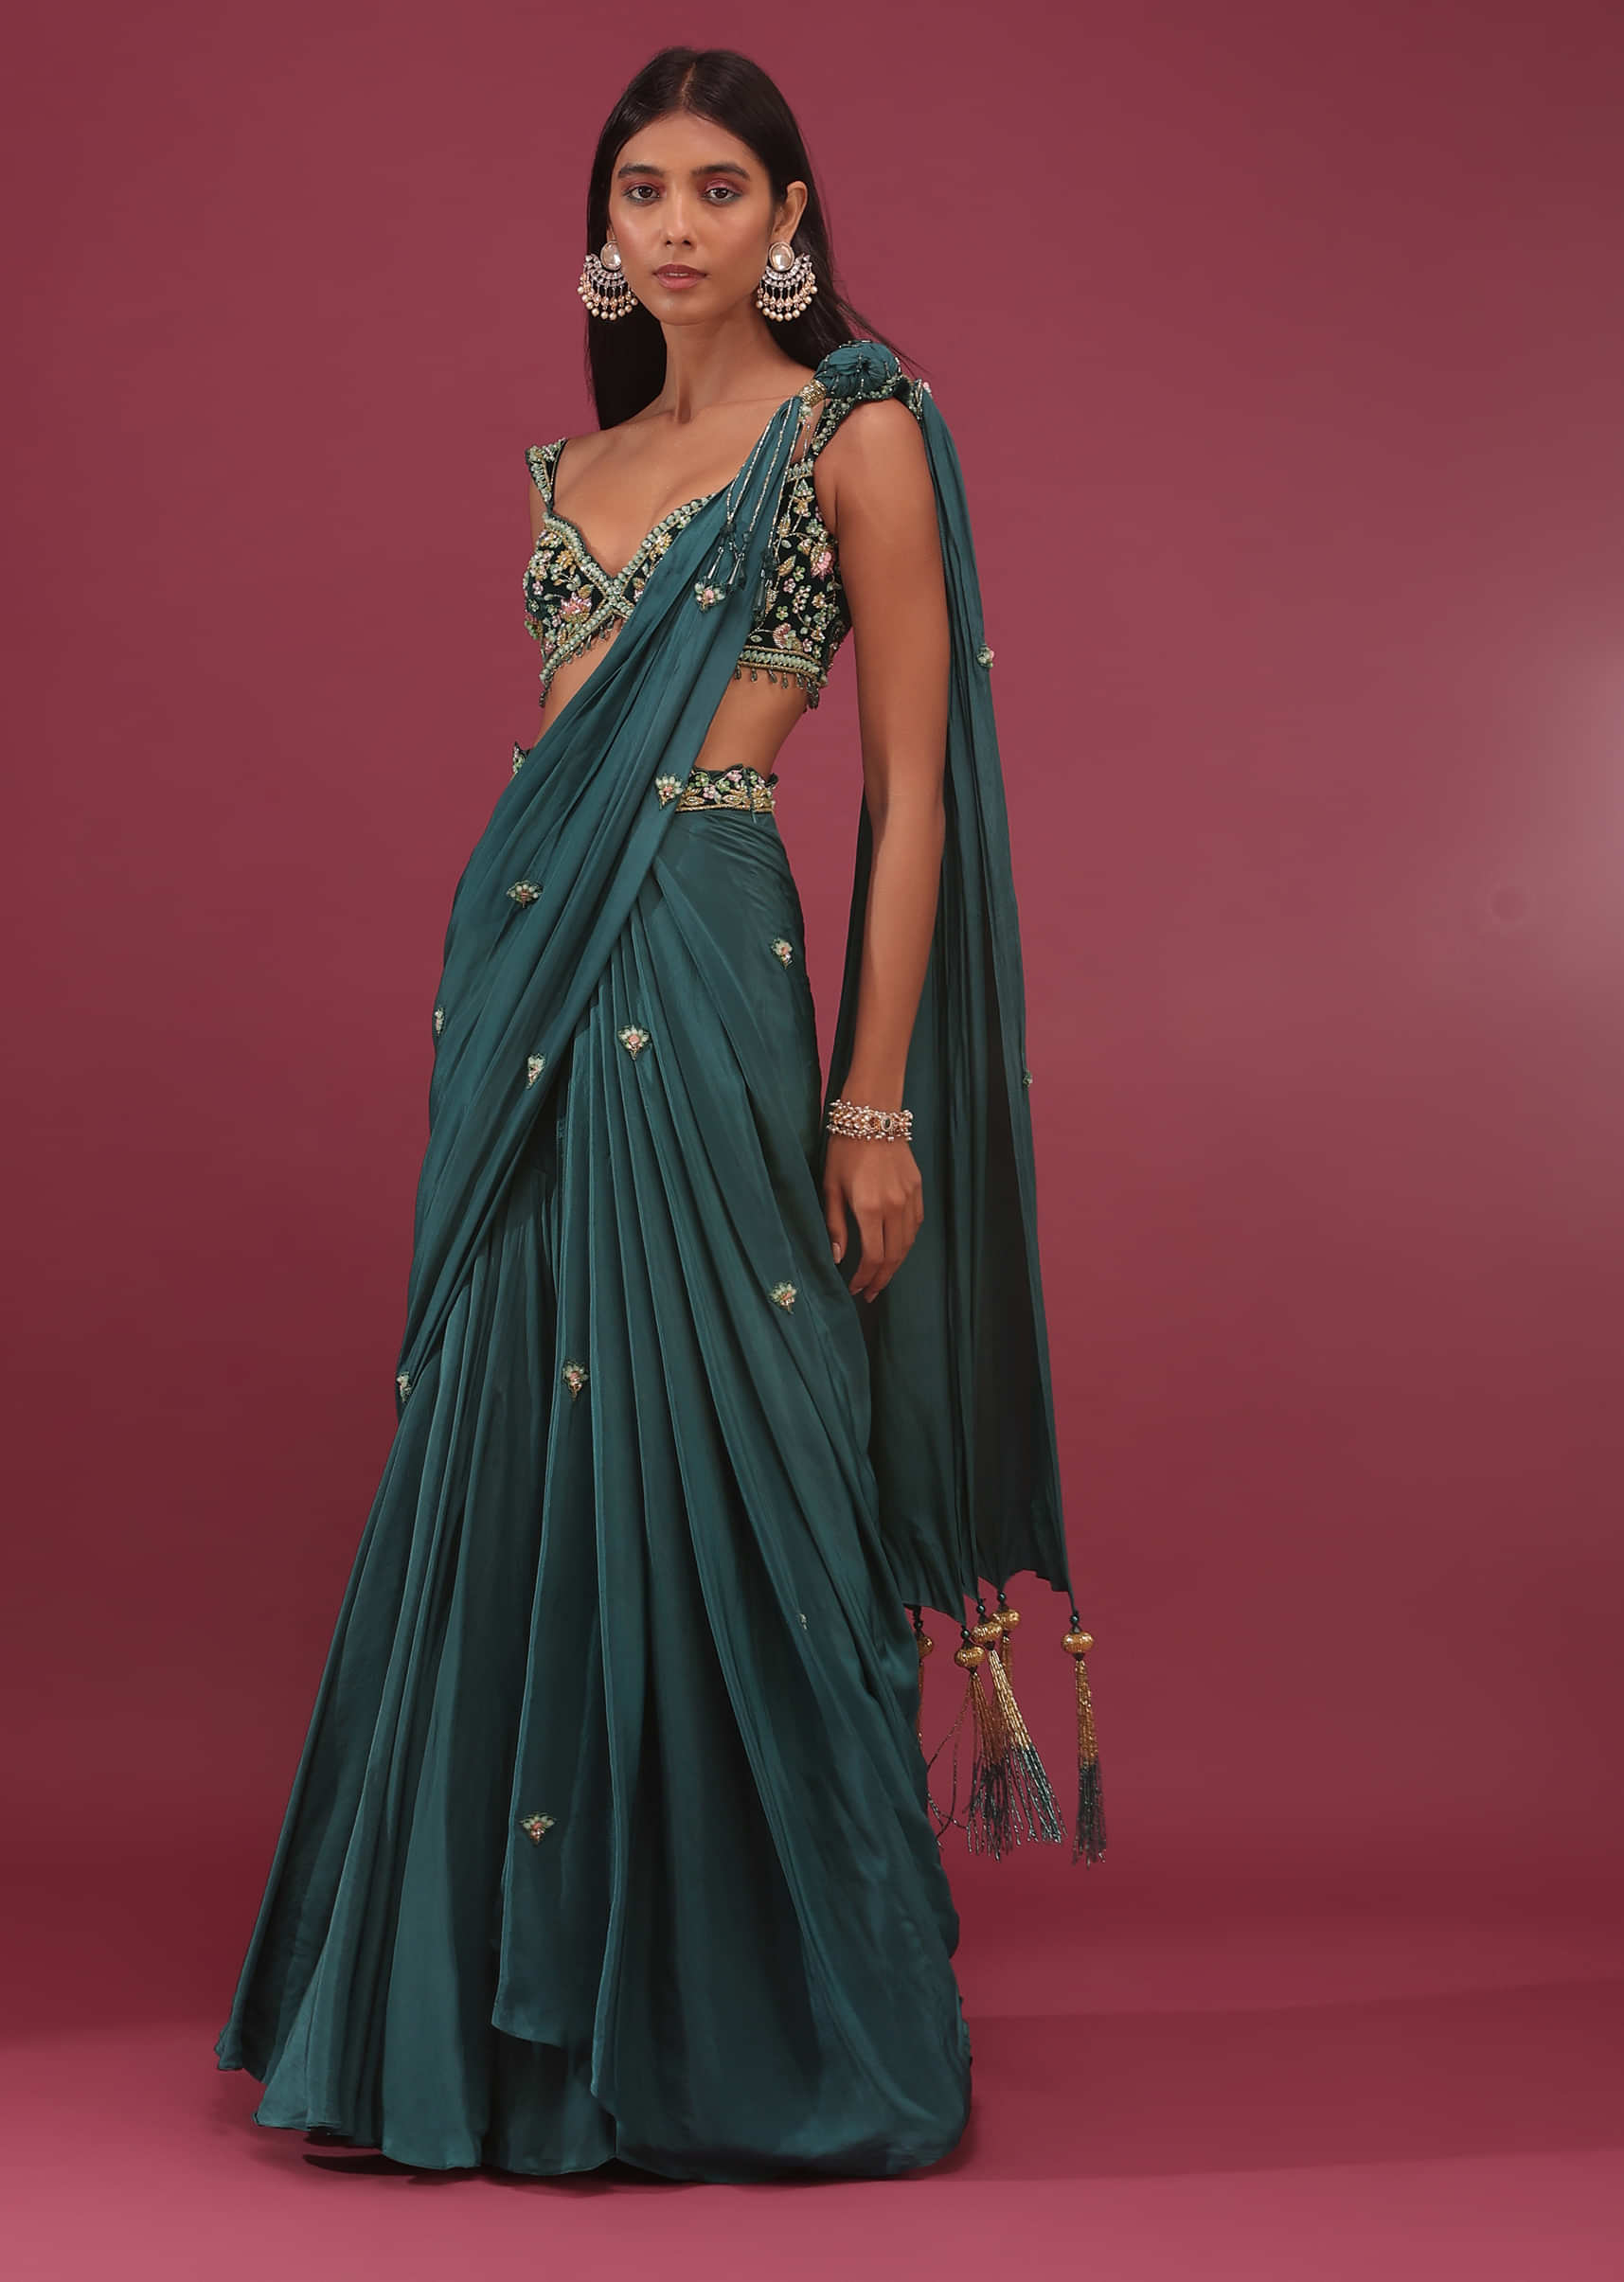 Pre-Pleated Emerald Green Saree With Floral Buttis And A Embroidered Blouse - NOOR 2022